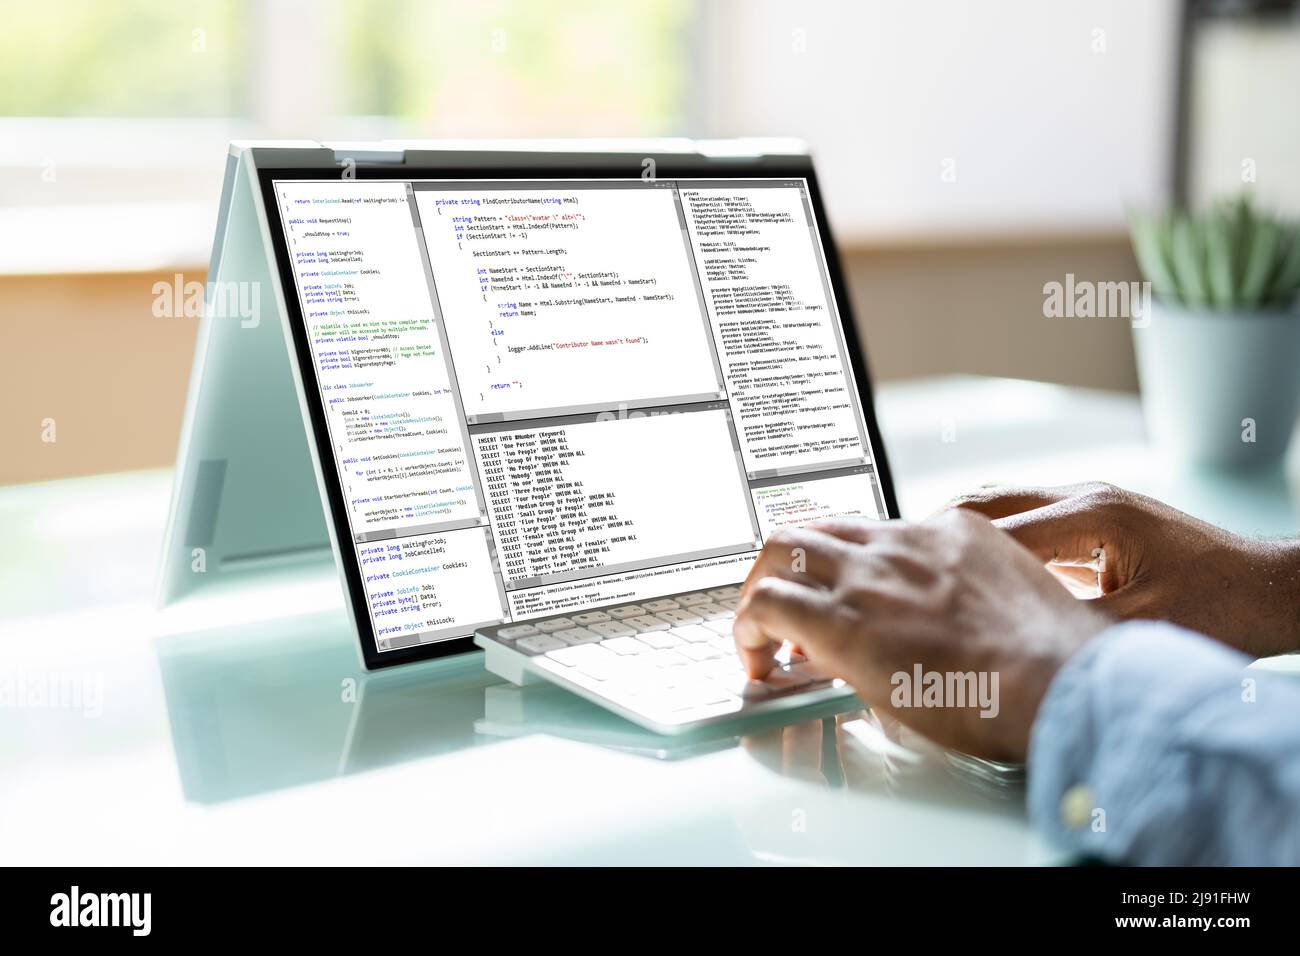 Programmer Or Coder At Office Desk Using Laptop Stock Photo